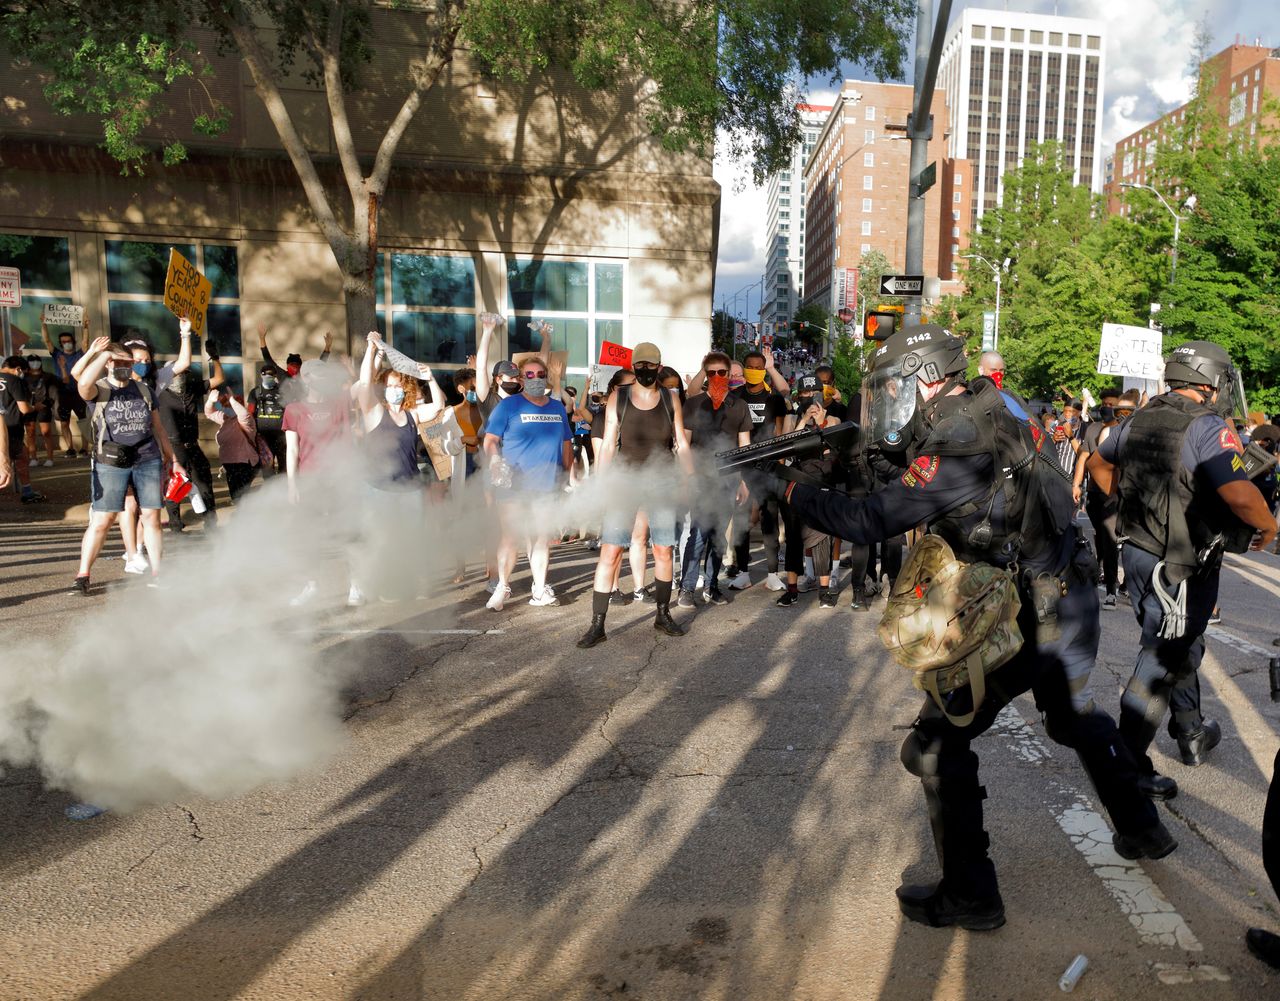 A policeman fires a tear gas canister at protesters in Raleigh, North Carolina.